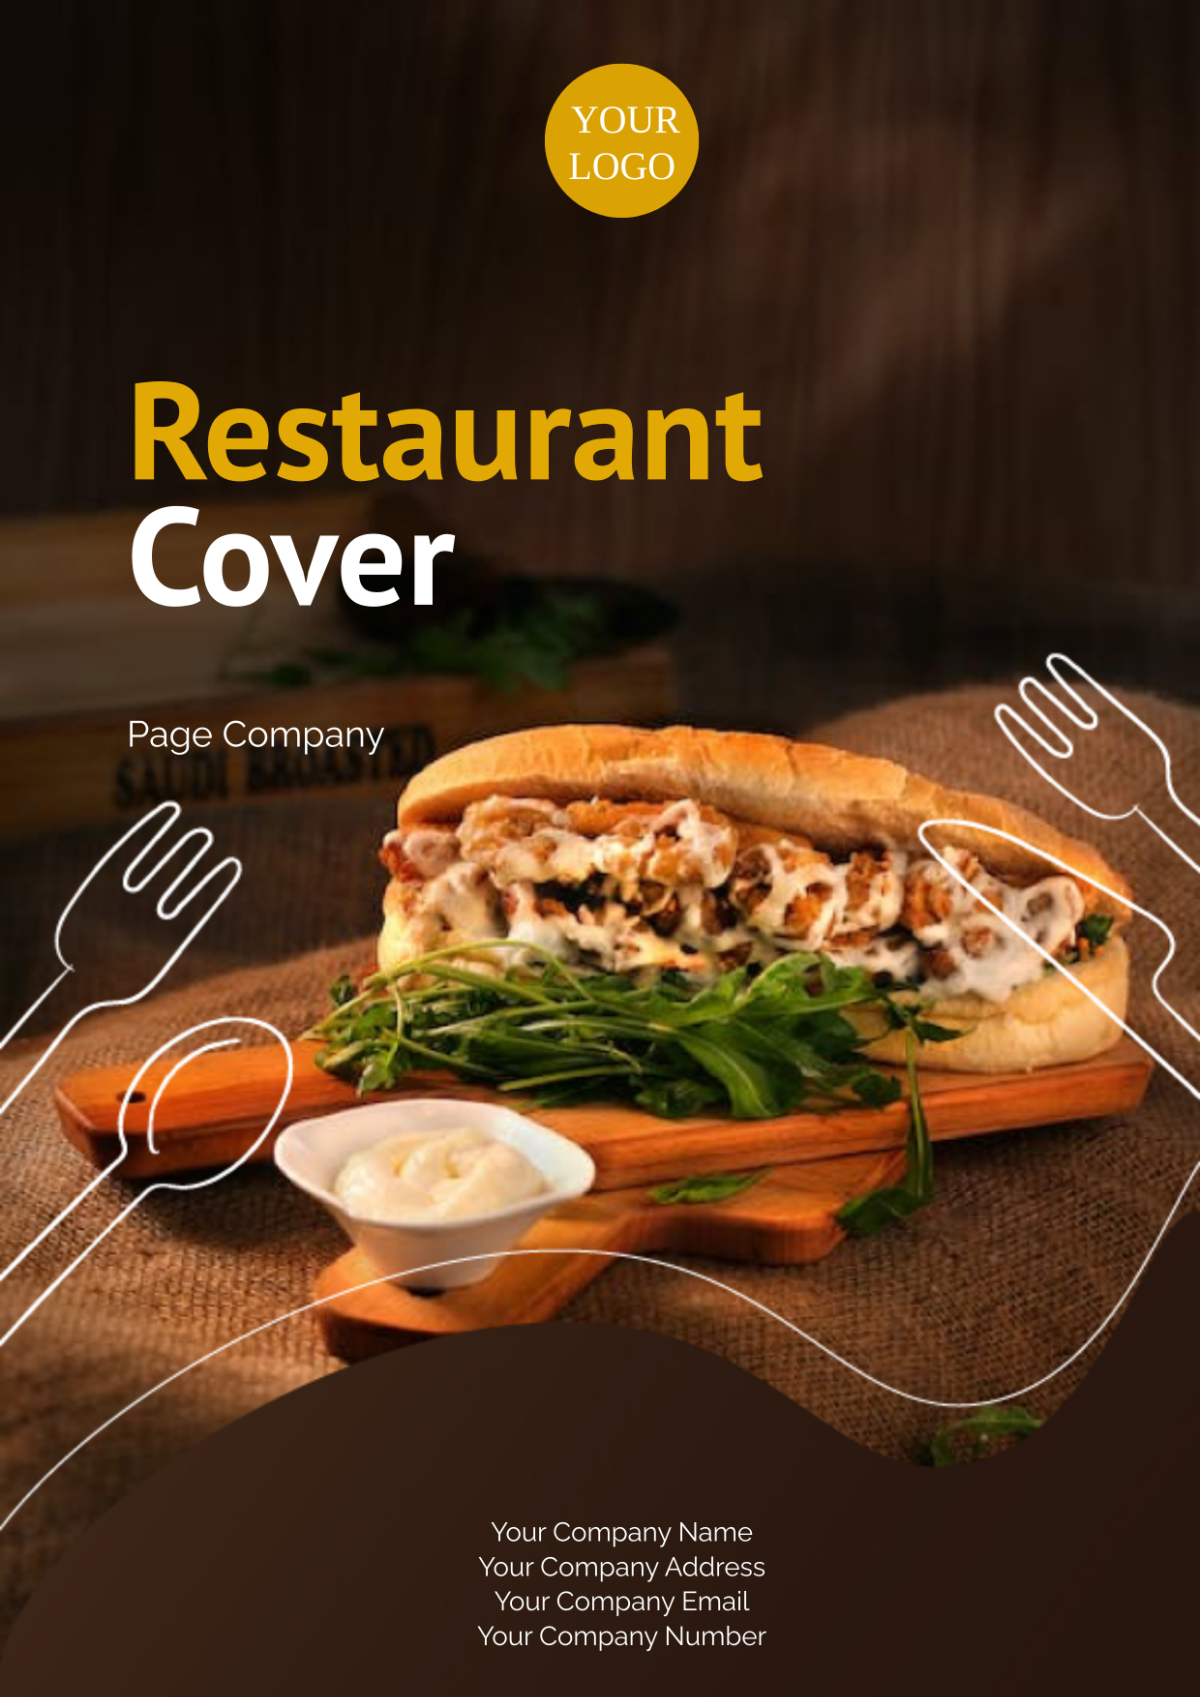 Restaurant Cover Page Company